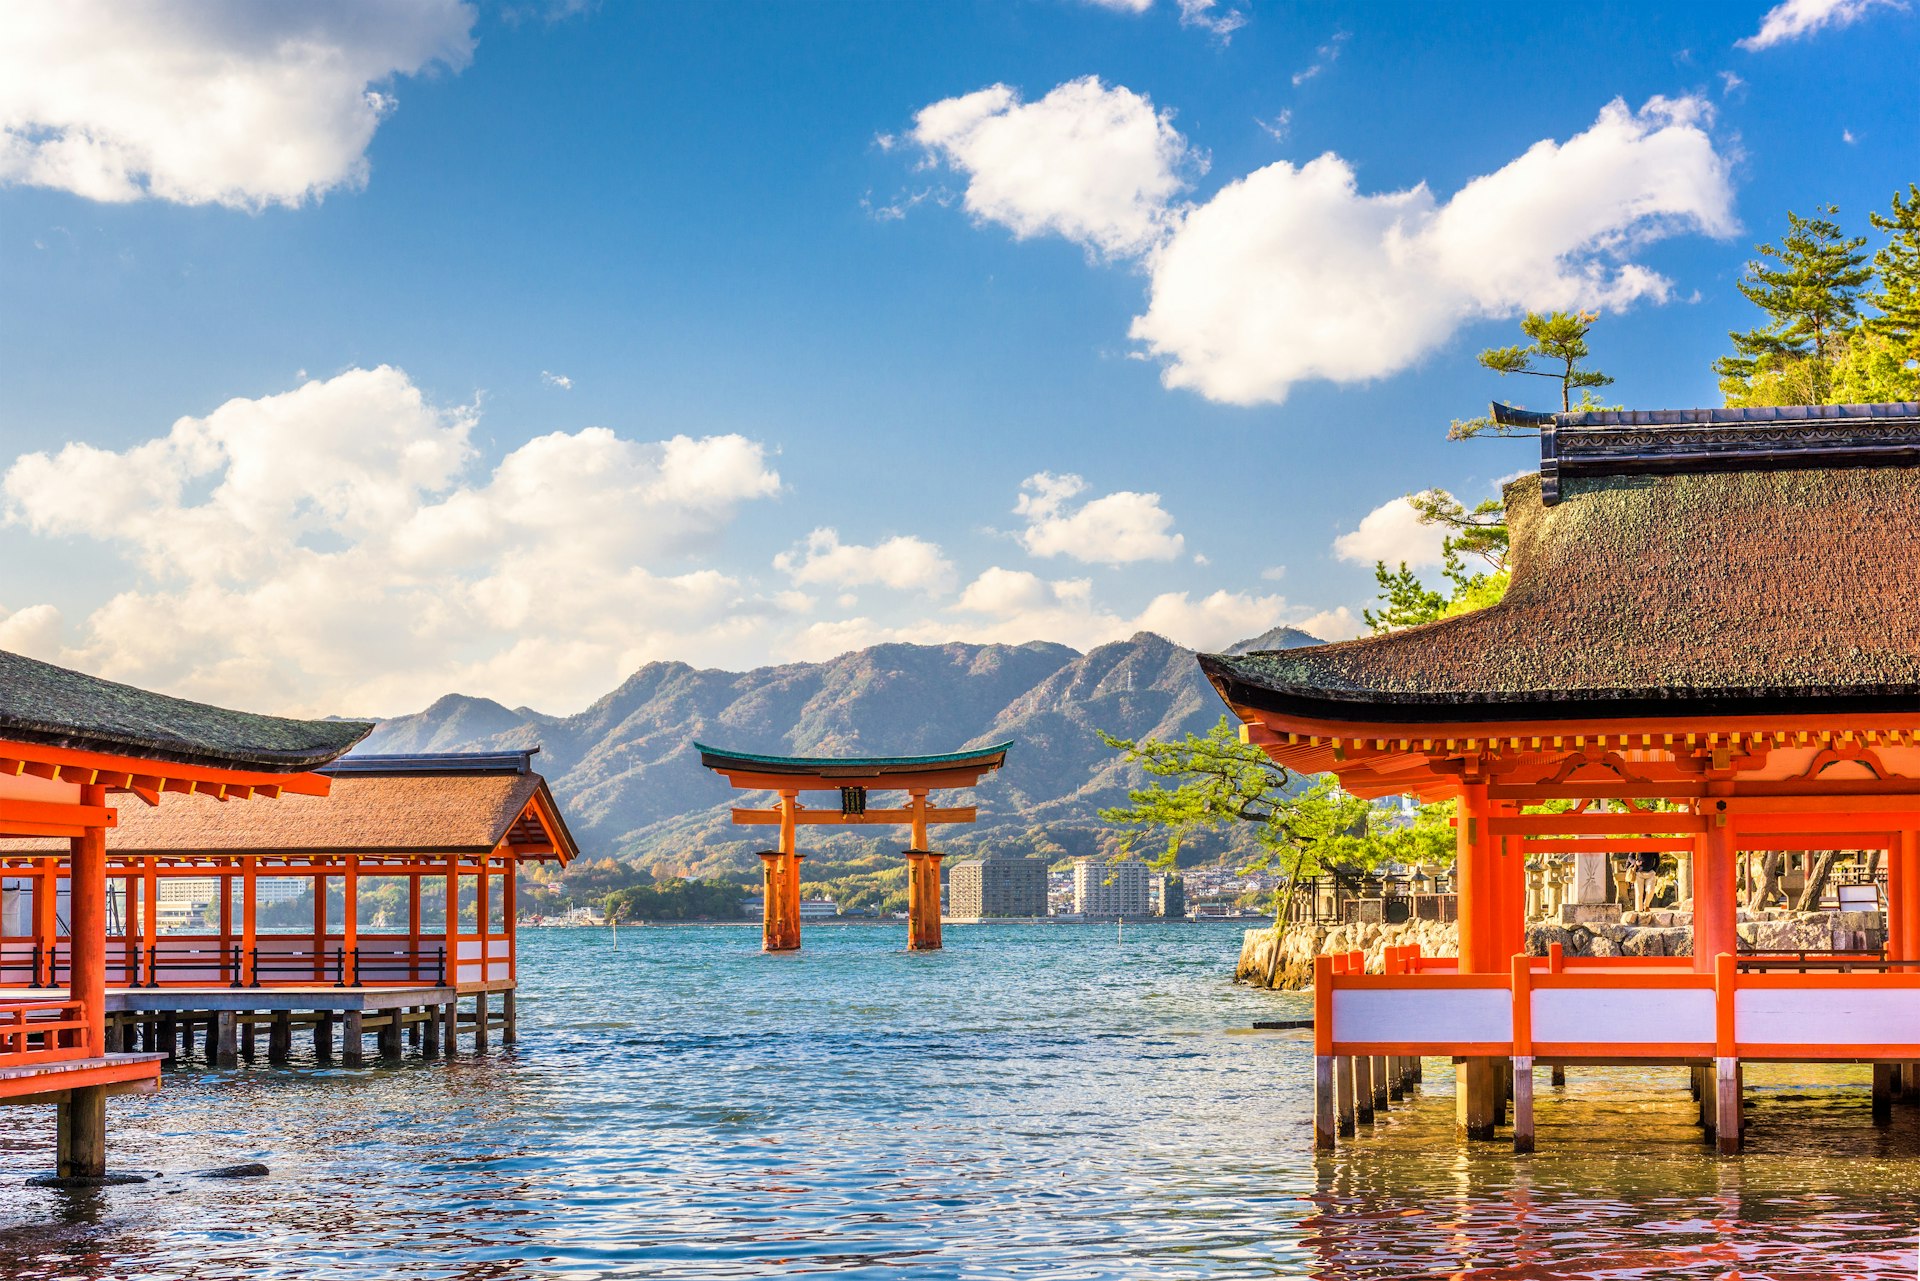 The 'floating' torii gate of the Shinto shrine on the island of Itsukushima. The orange structure appears as if it is floating on the water.